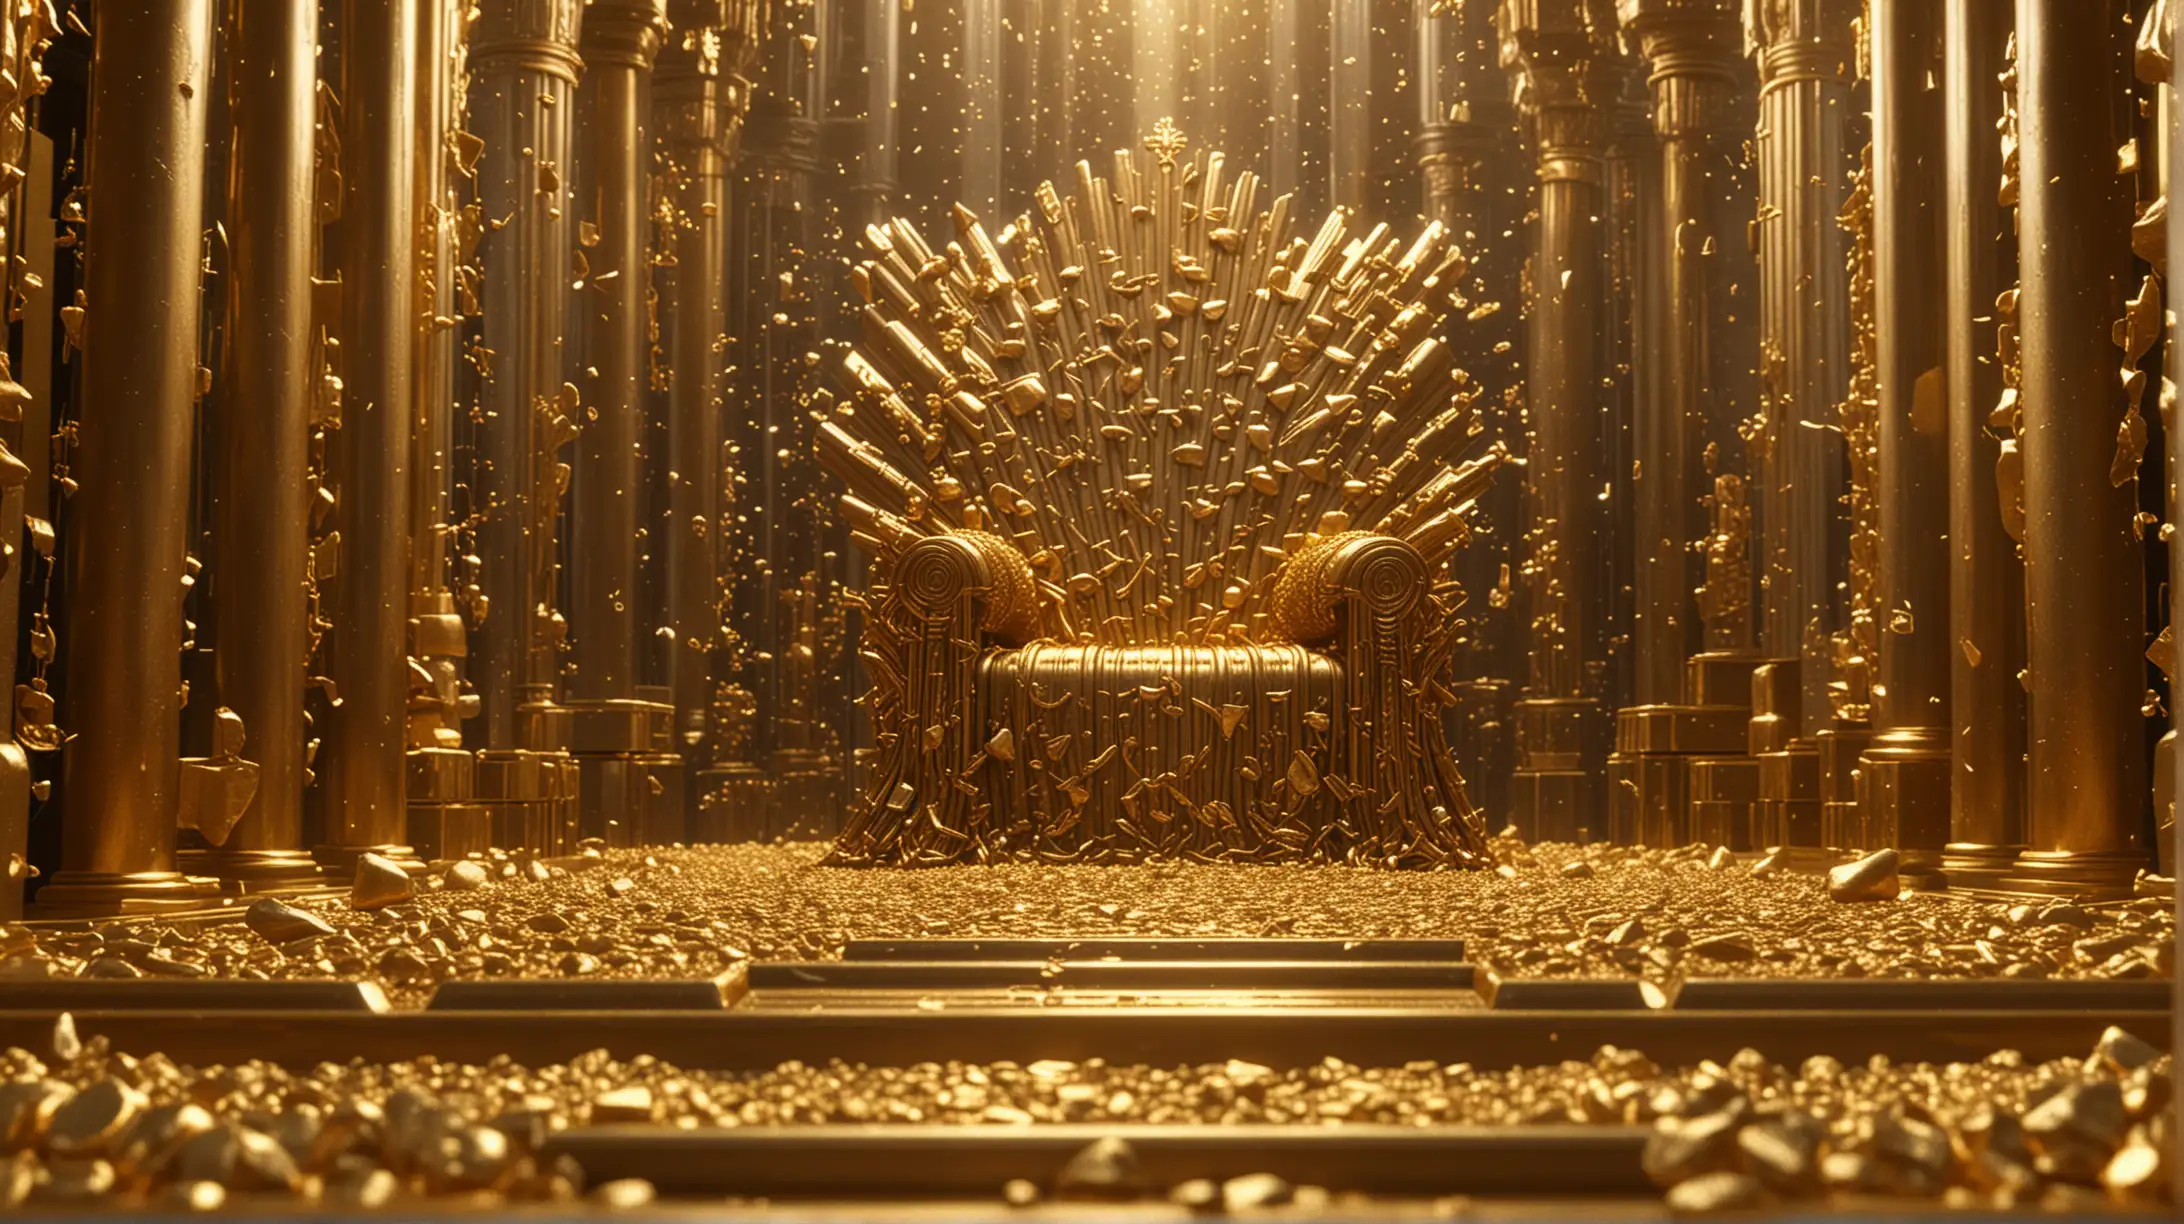 Golden Throne Room with Intricate Details and Cinematic Lighting